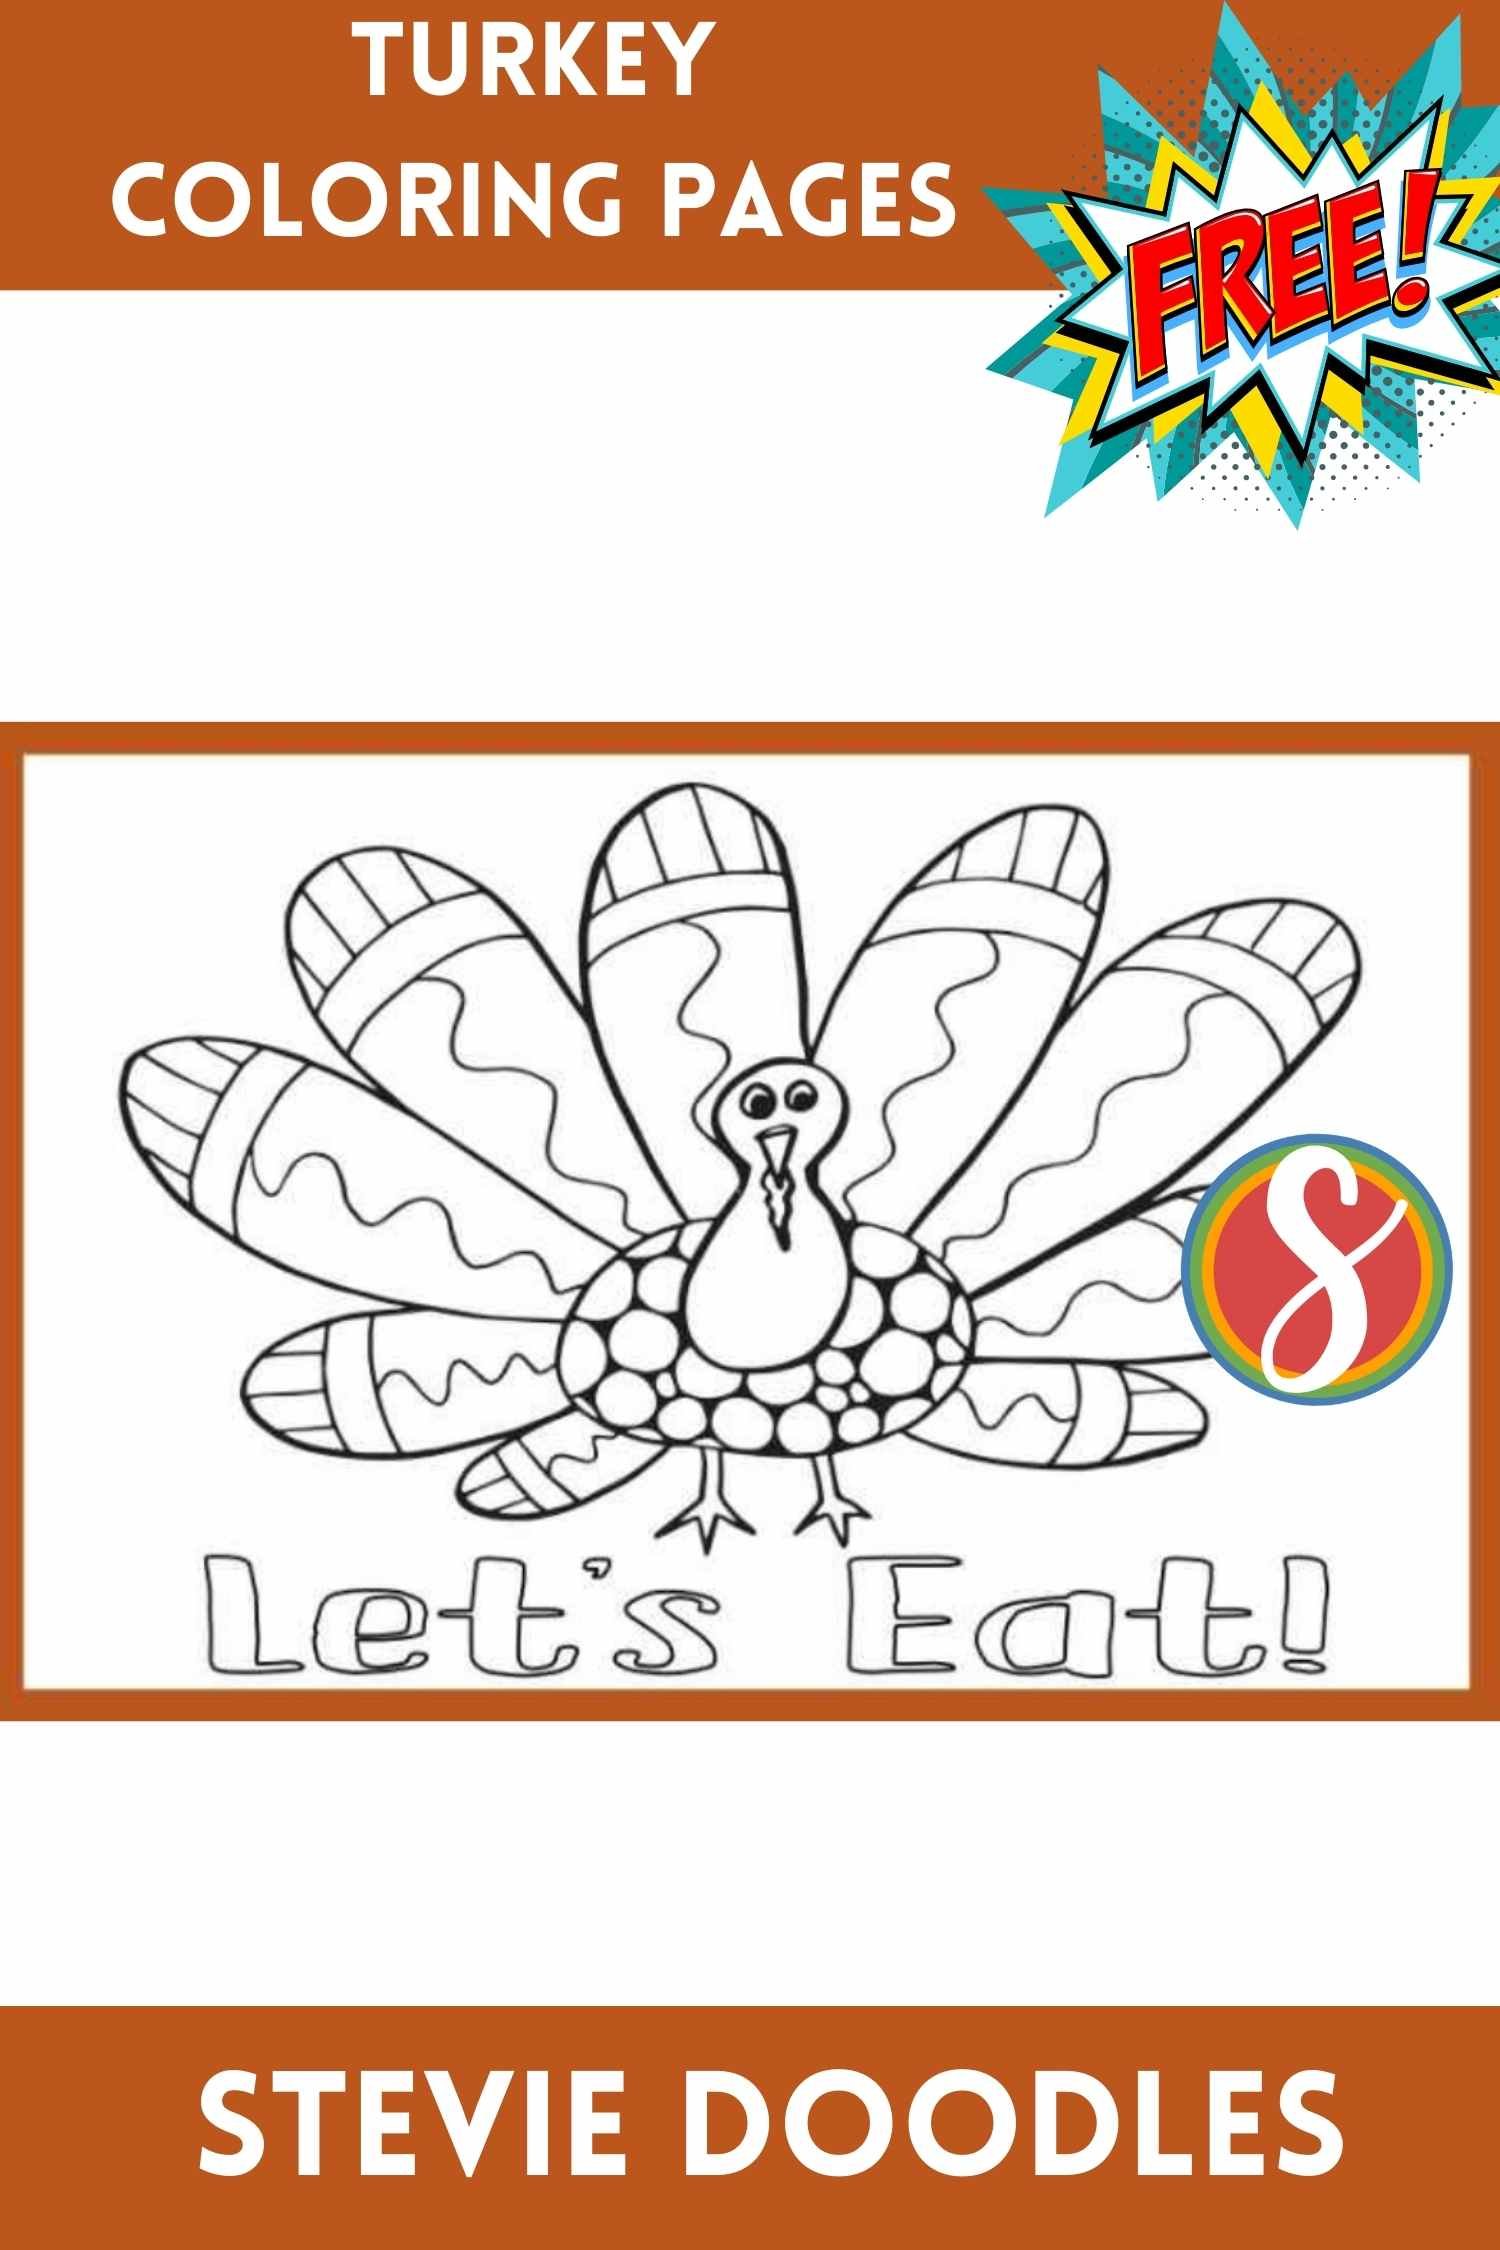 outline of a turkey filled with doodles to color, colorable "let's eat" underneath